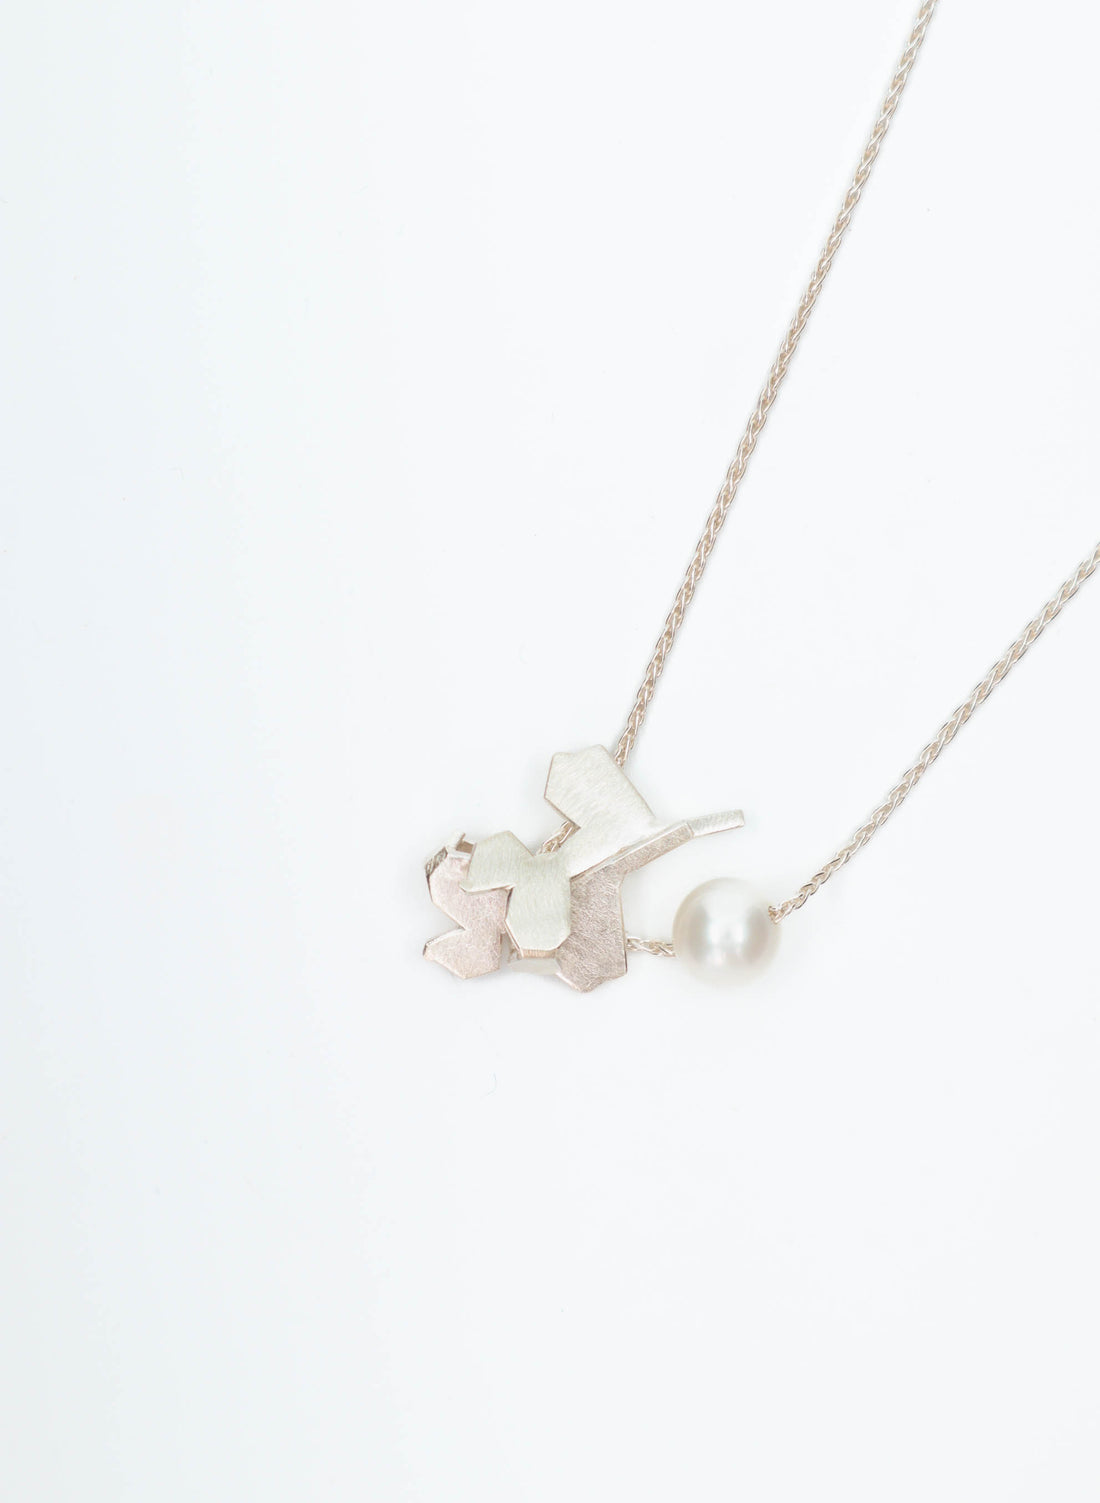 Intertwined Leaf Structure Necklace with white Pearl